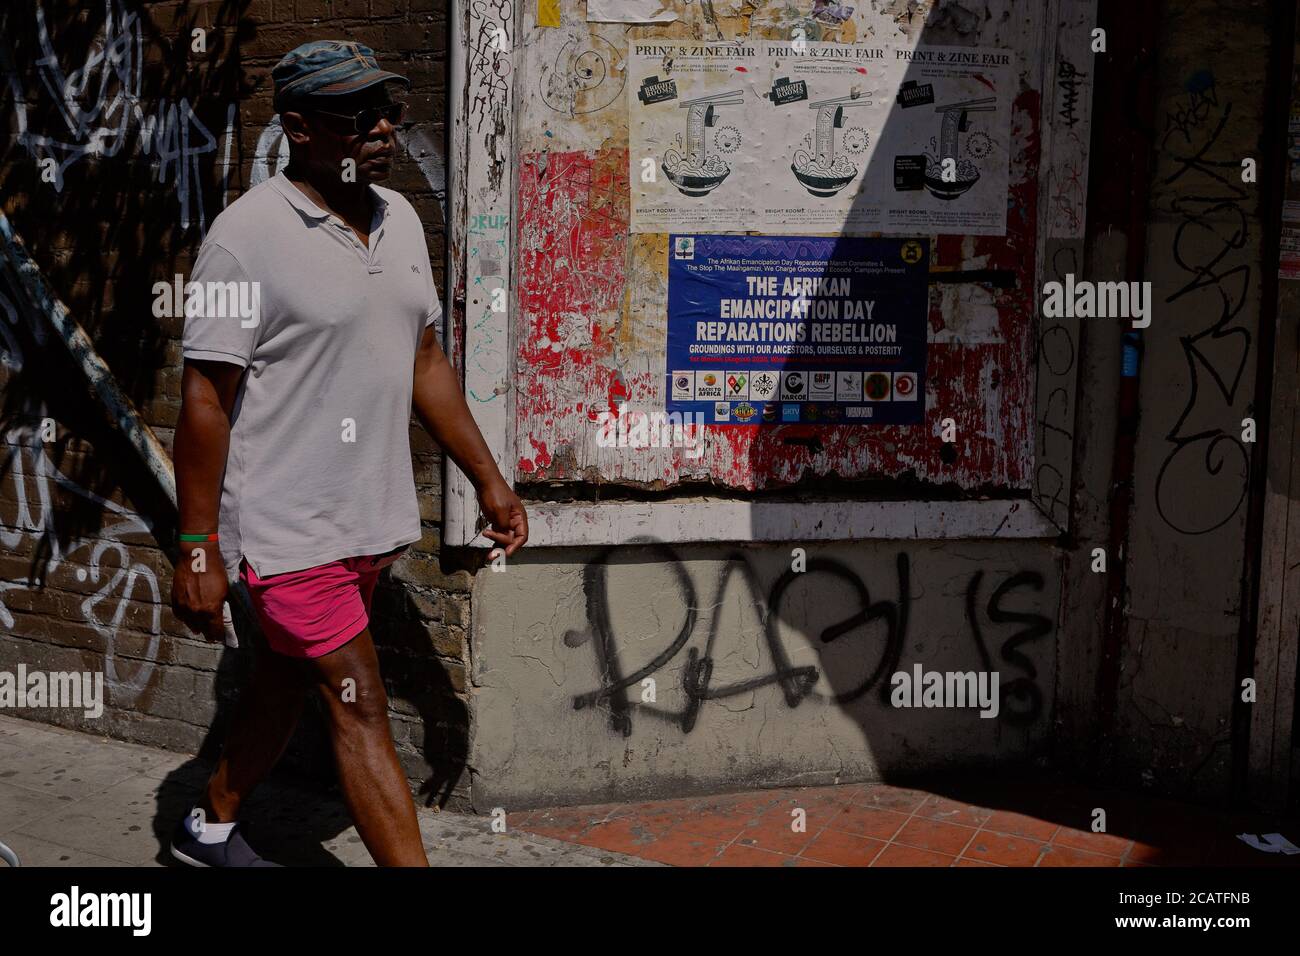 Peckham   London (UK), August 2020: A man walks past a poster advertising 'Afrikan Emancipation Day' in SE London. Emancipation day is held yearly on Stock Photo